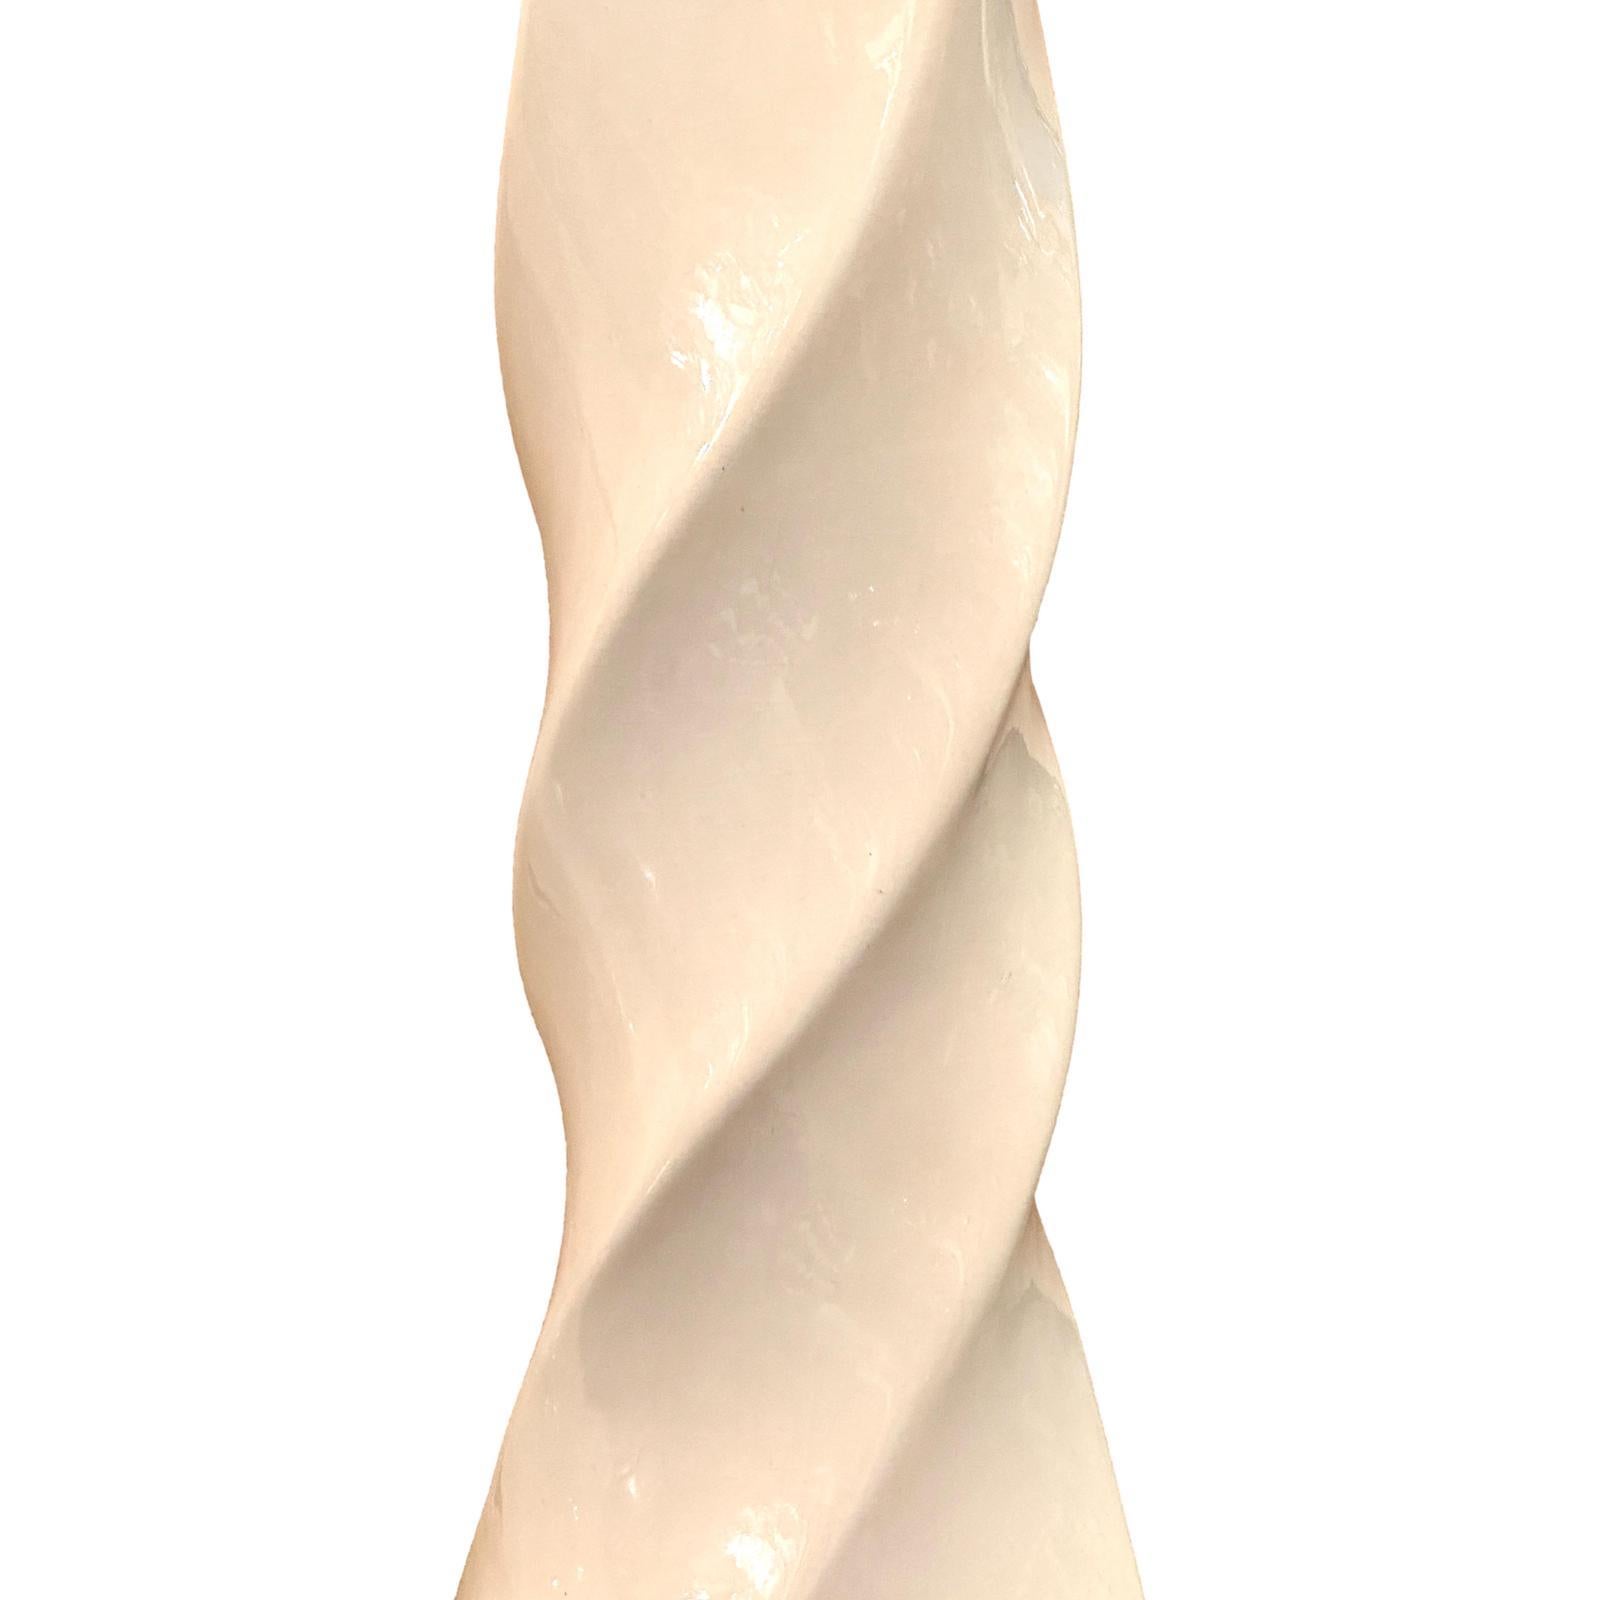 Pair of circa 1950's Italian twisted column cream porcelain lamps.

Measurements:
Height of body: 20